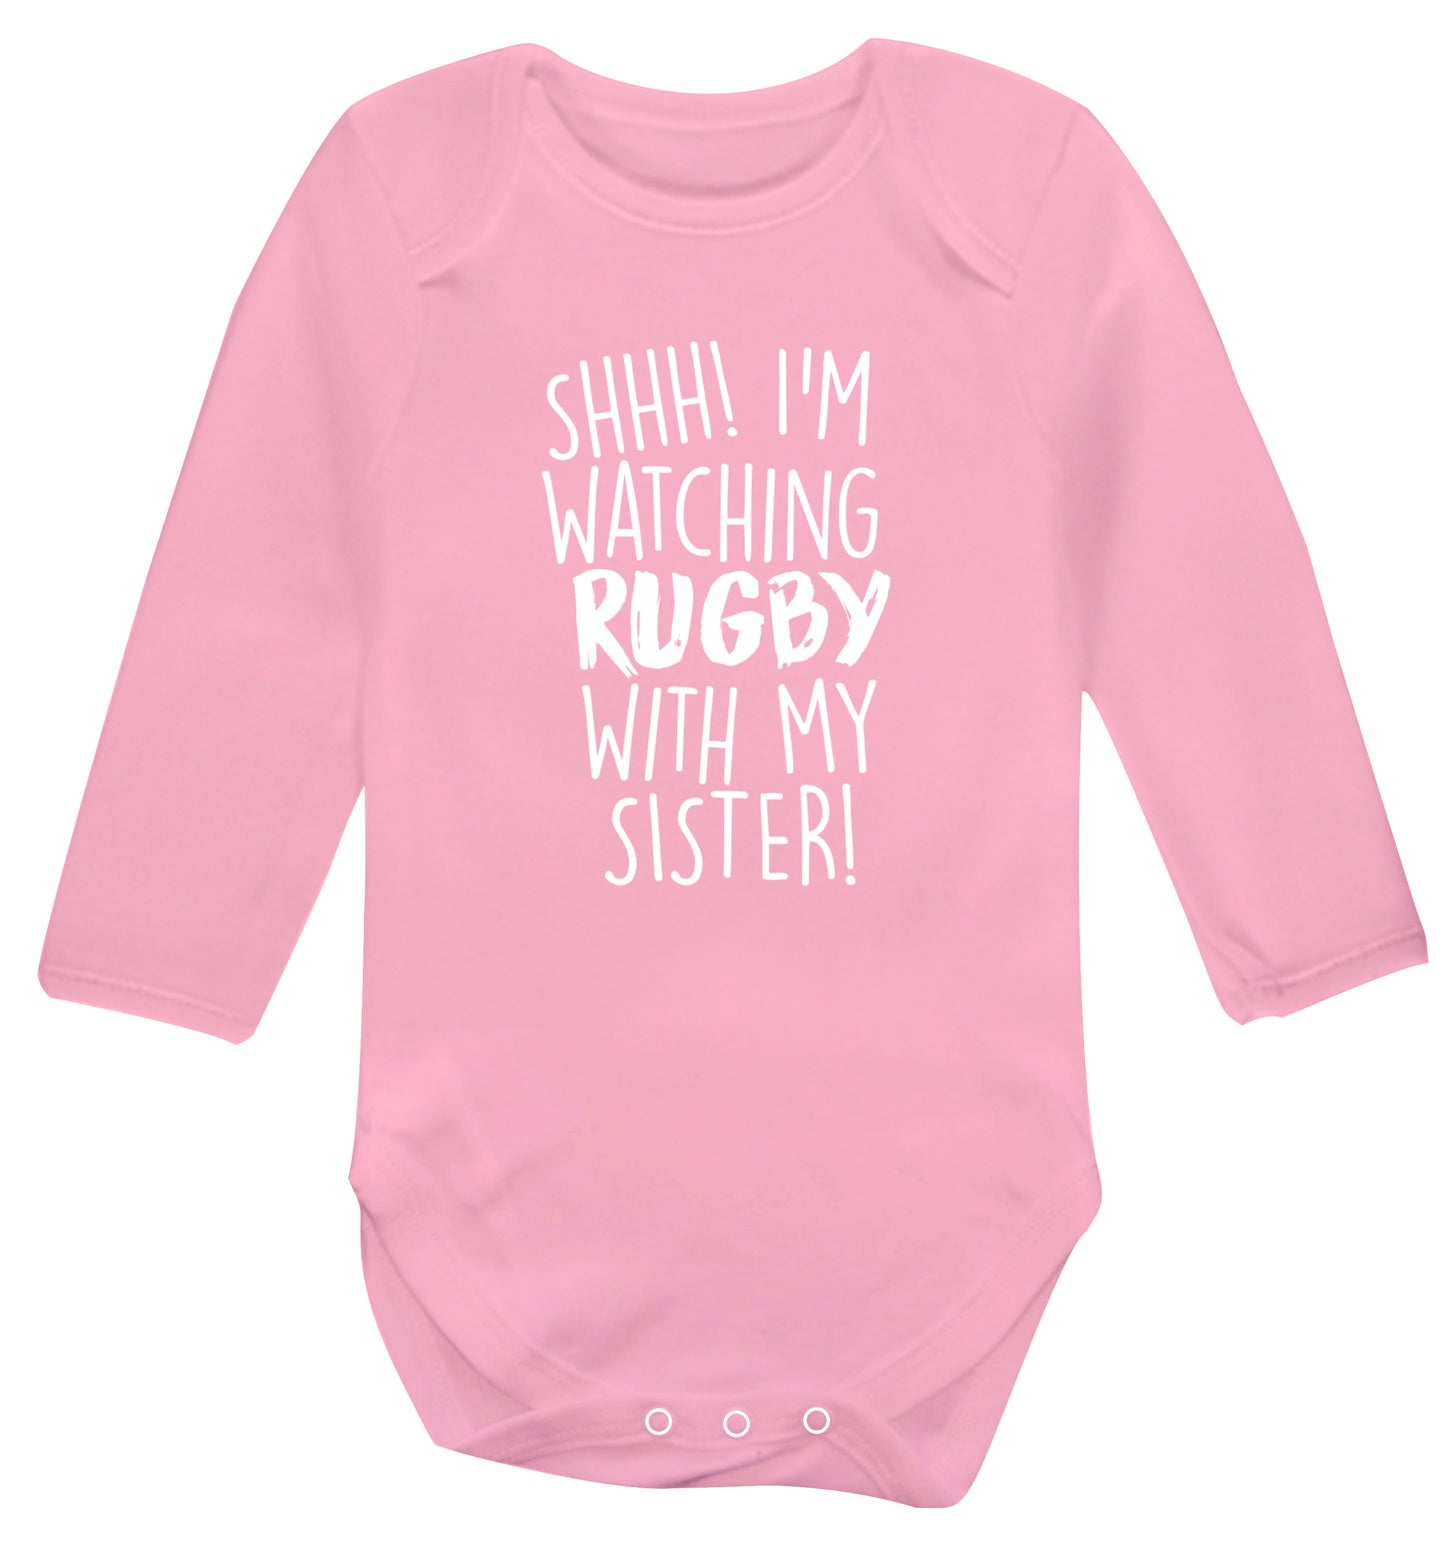 Shh... I'm watching rugby with my sister Baby Vest long sleeved pale pink 6-12 months